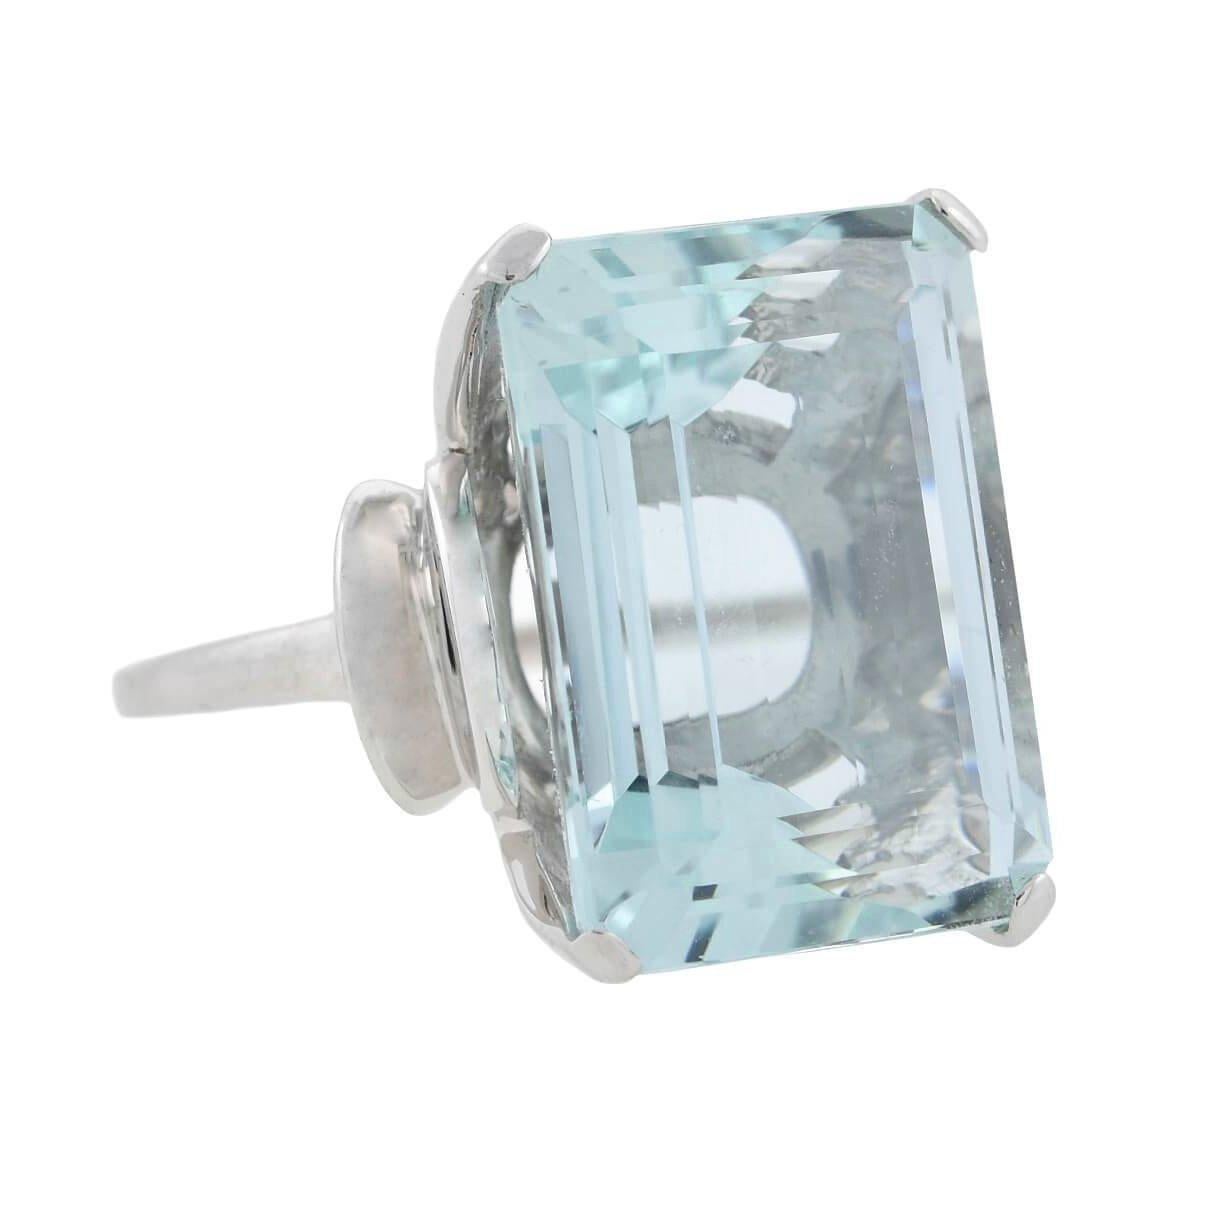 A showstopping aquamarine cocktail ring from the Retro (ca1940s) era! Crafted in 14kt white gold, this fabulous piece adorns a substantial, Emerald Cut aquamarine stone. The prong set stone weighs approximately 21.35ctw and displays an incredibly